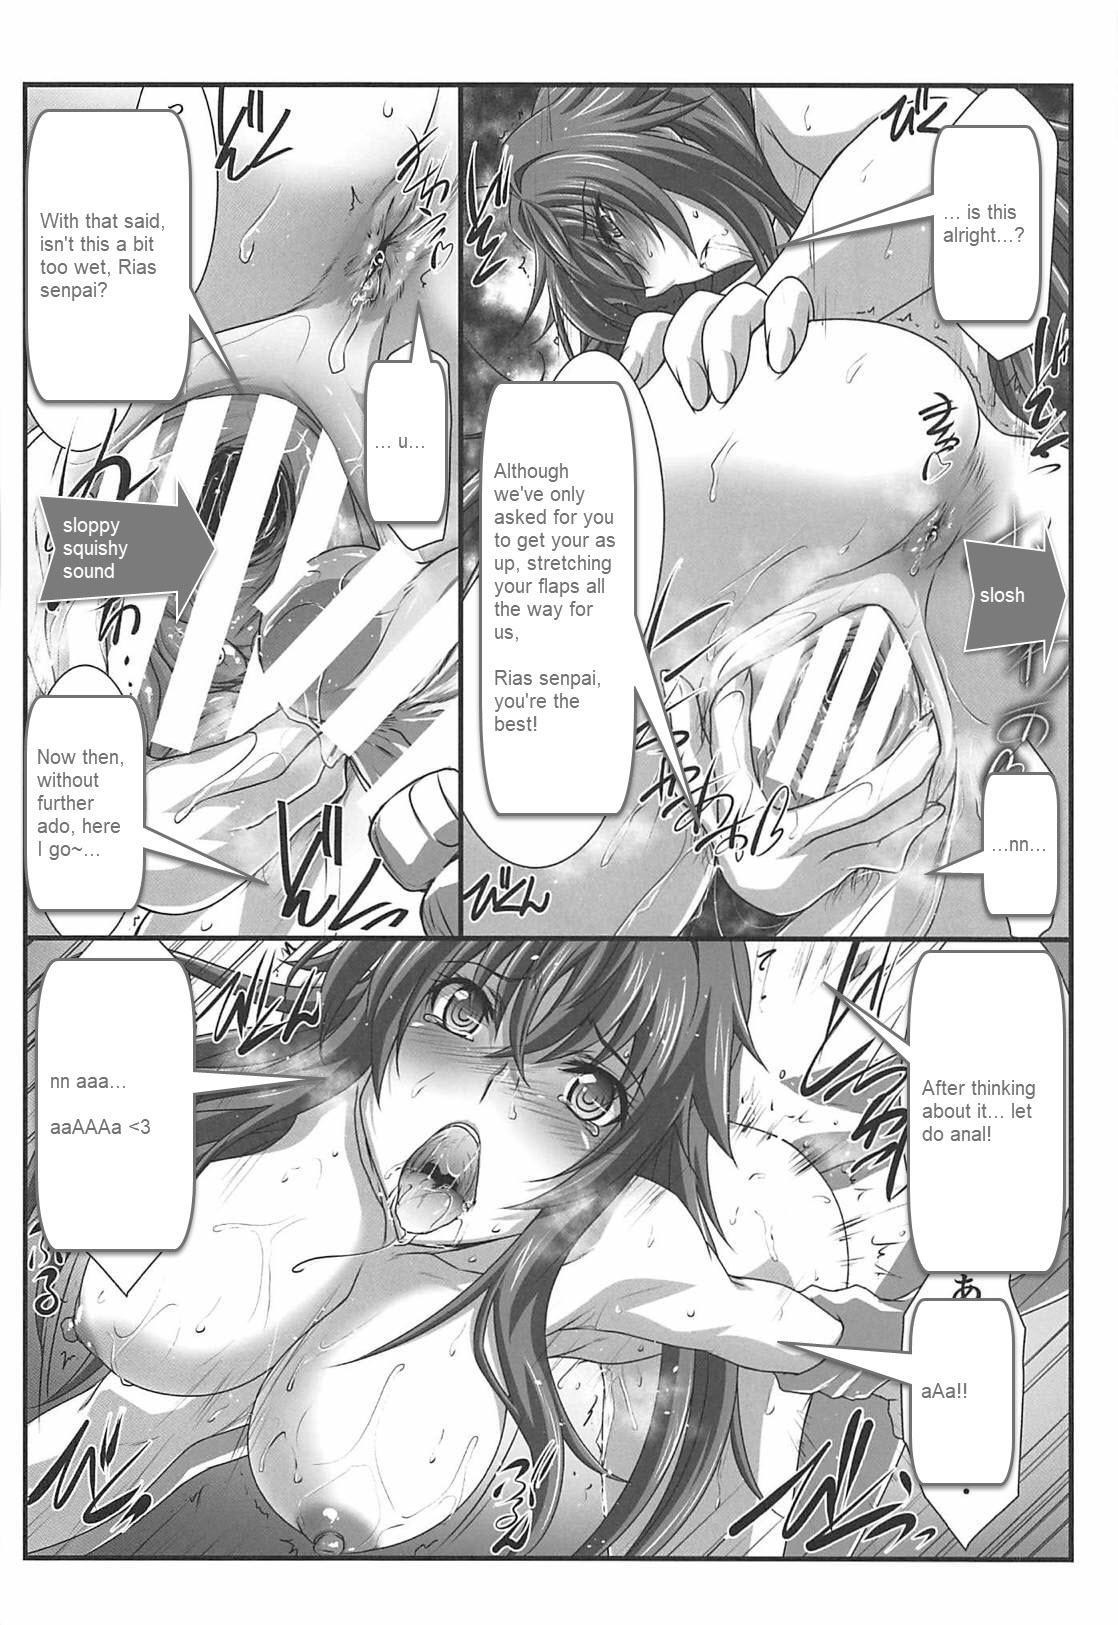 Carro SPIRAL ZONE DxD II - Highschool dxd Glory Hole - Page 11